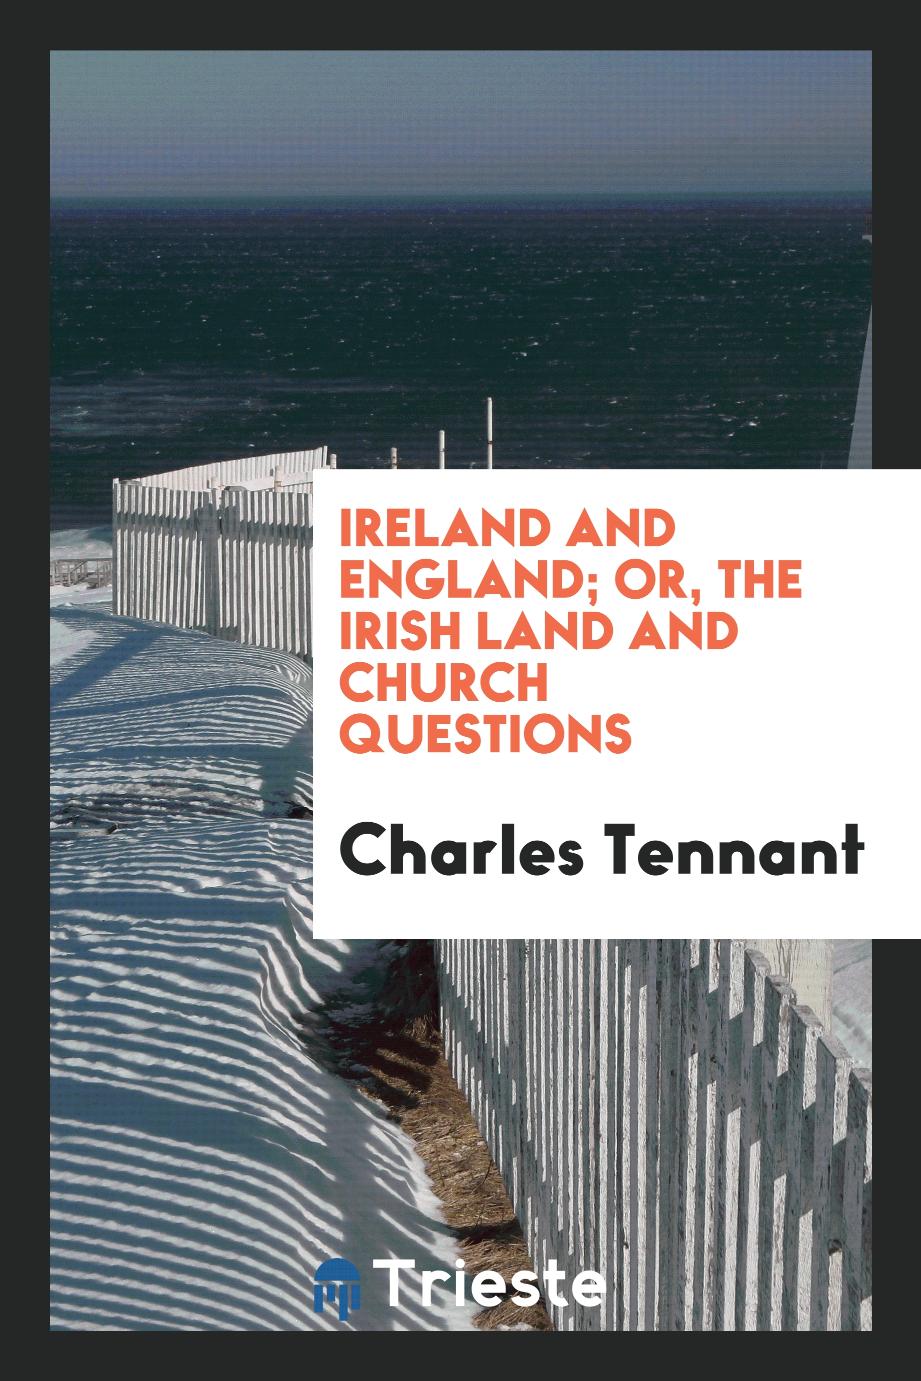 Ireland and England; Or, The Irish Land and Church Questions